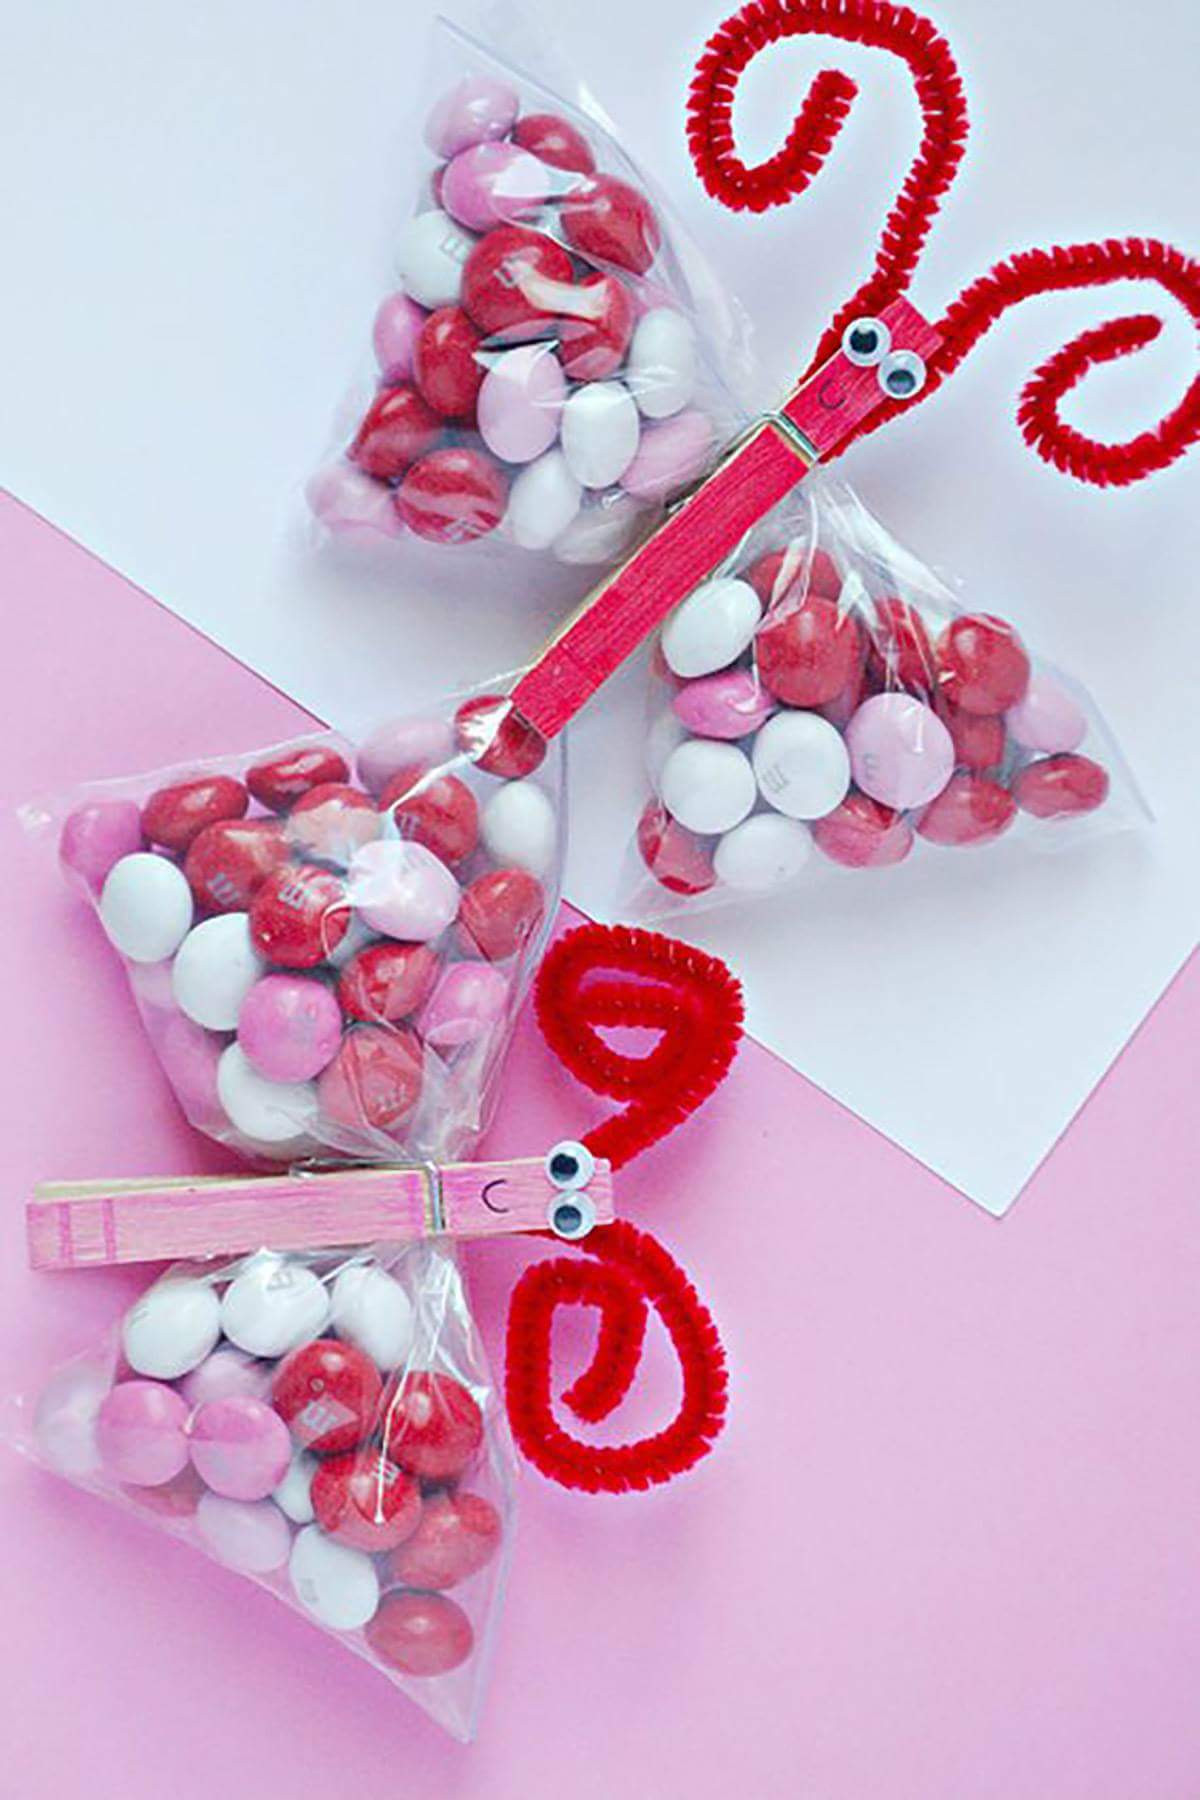 Valentines Day Candy Crafts
 40 Easy DIY Valentine’s Day Craft Ideas to Make Your